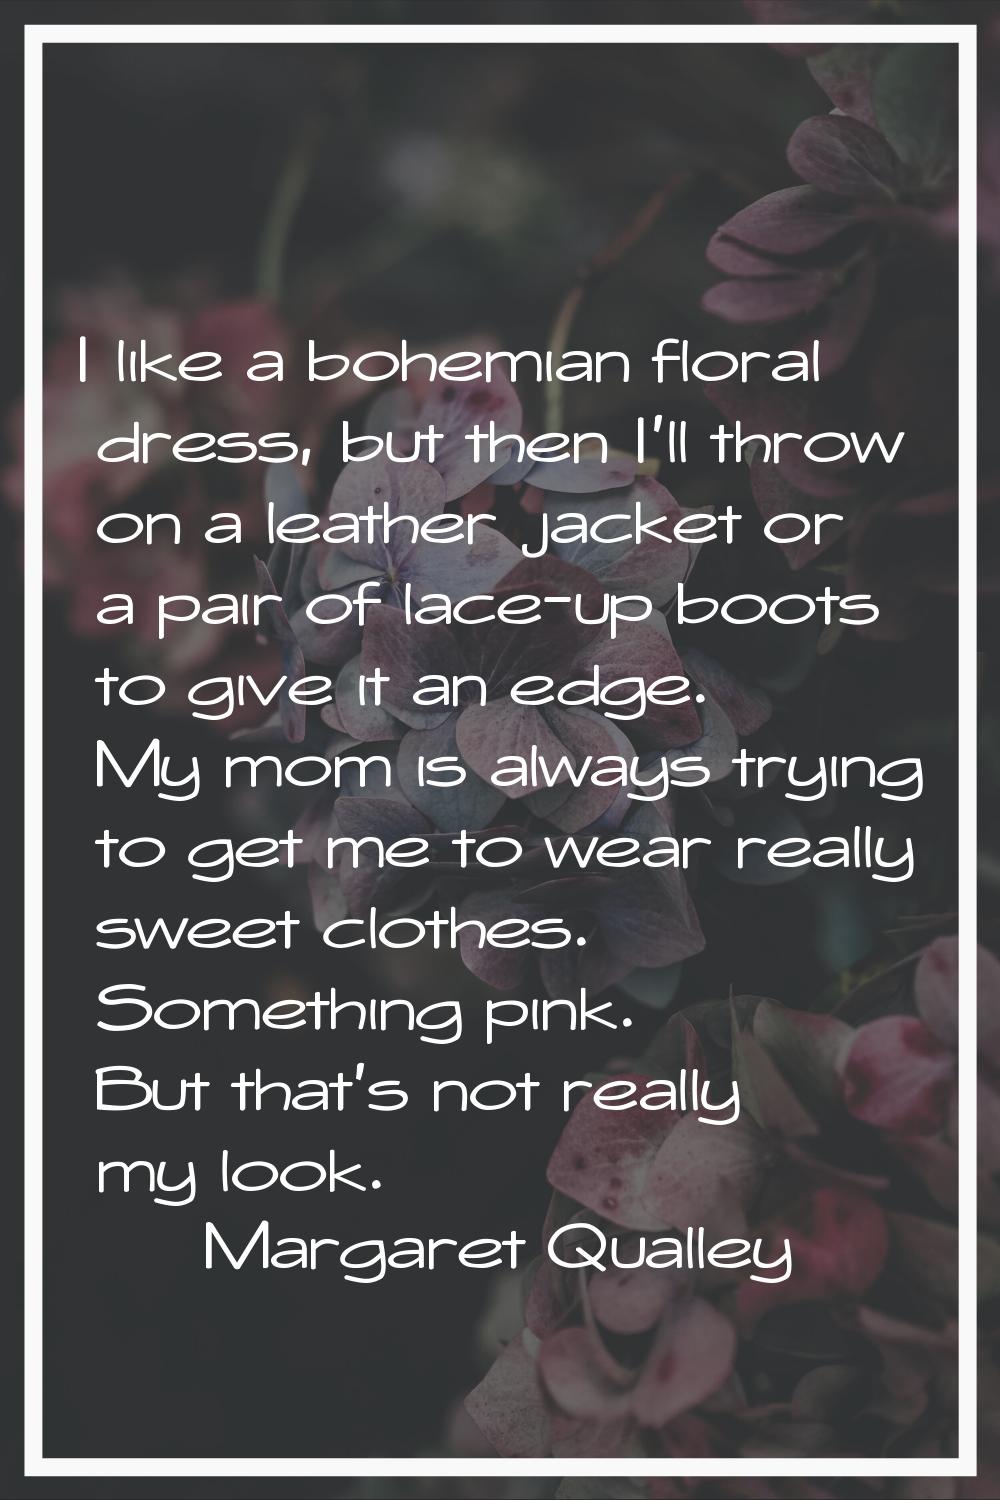 I like a bohemian floral dress, but then I'll throw on a leather jacket or a pair of lace-up boots 